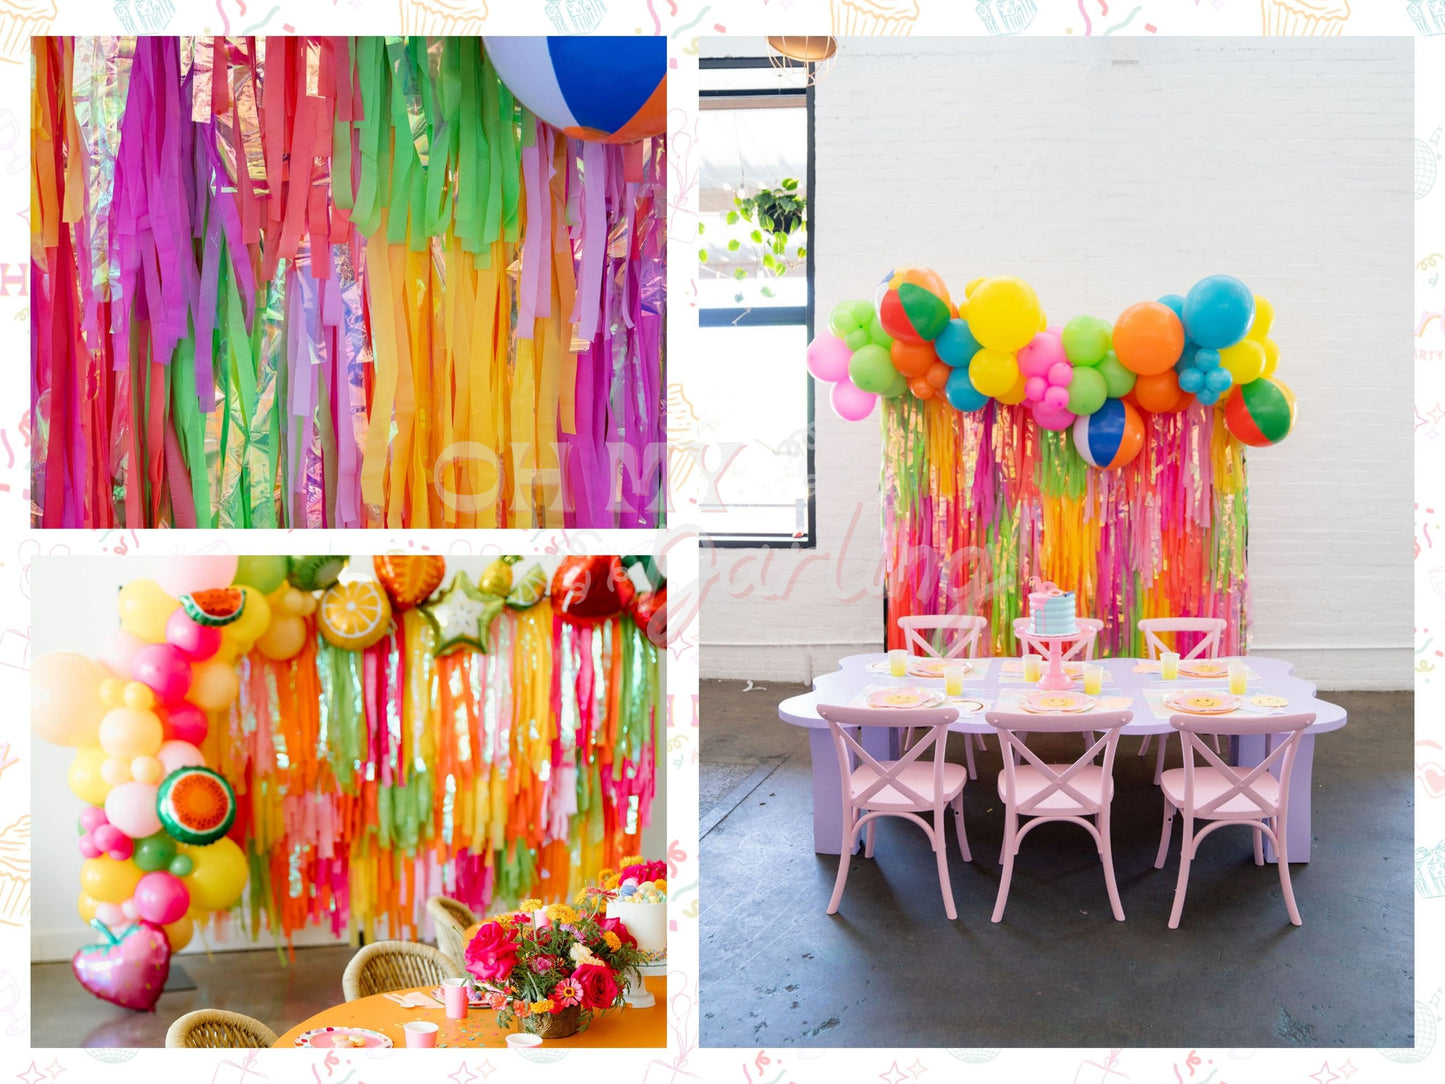 Tutti Fruitti Backdrop-Fringe Backdrop-Party Decor-Oh My Darling Party Co-Oh My Darling Party Co-baby pink, backdrops for party, balloon garlands, Bubblegum, Candy Pink, Coral, fringe backdrop, fringe decor, fringe garland, Fringe Streamers, fruit, fruits, Goldenrod, green, GREEN BACKDROP, GREEN BACKDROPS, Iridescent, Lime, lime green, neon party, OMDPC, Orange, party backdrops, Pink, pink baby shower, pink bachelorette, PINK BACKDROP, pool party, standard, summer, summer fruit, summer soiree, tassels, tutt